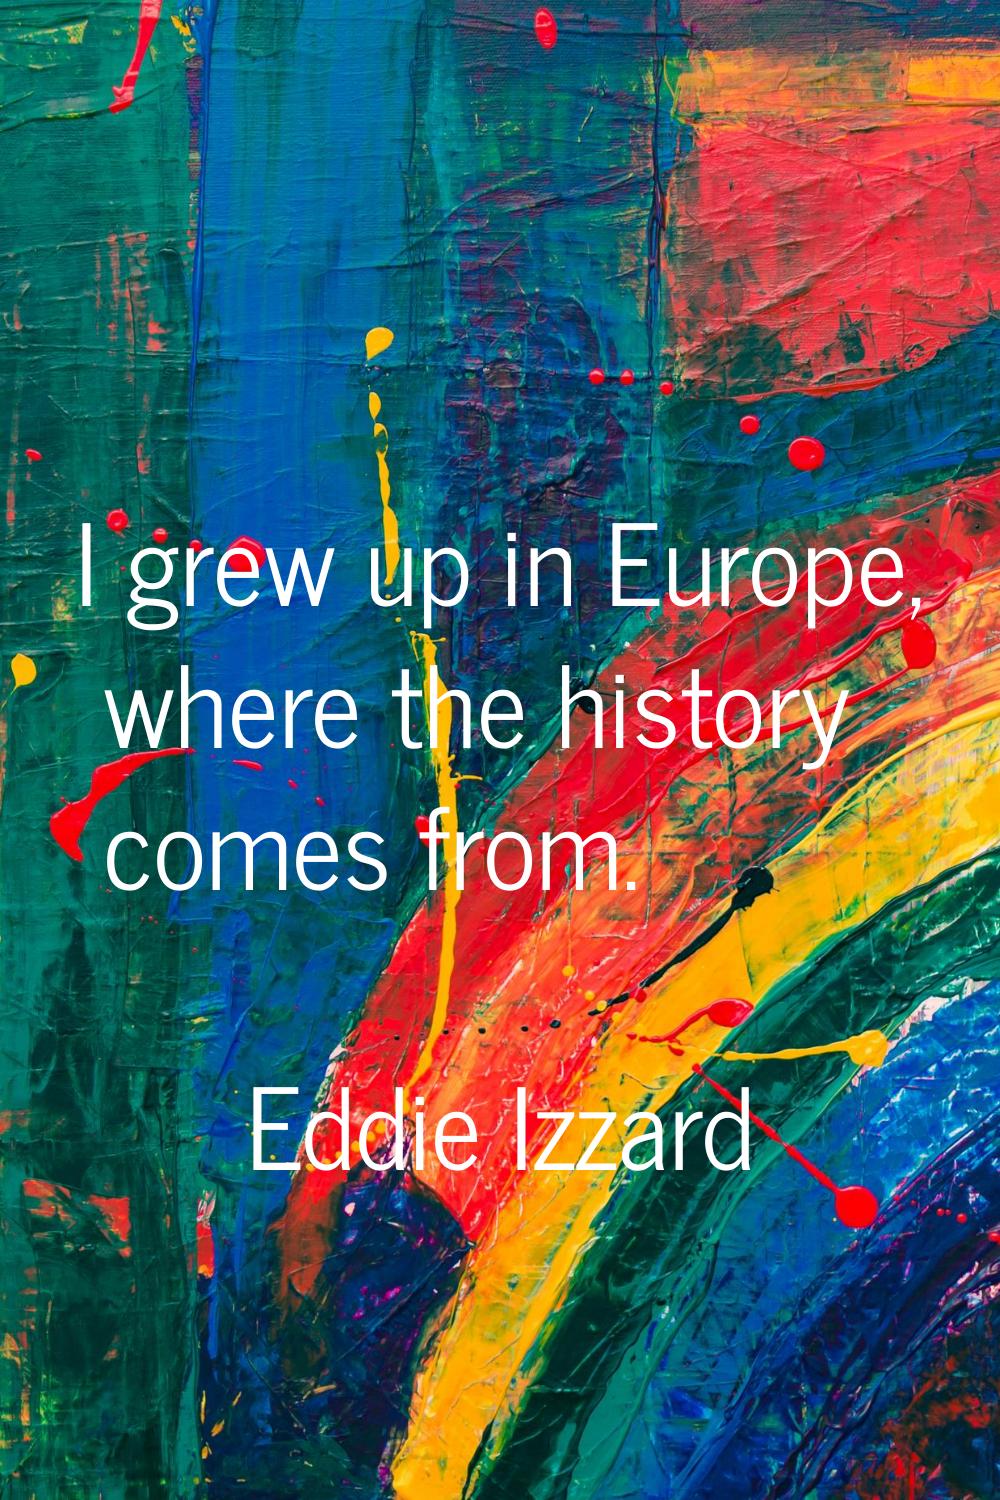 I grew up in Europe, where the history comes from.